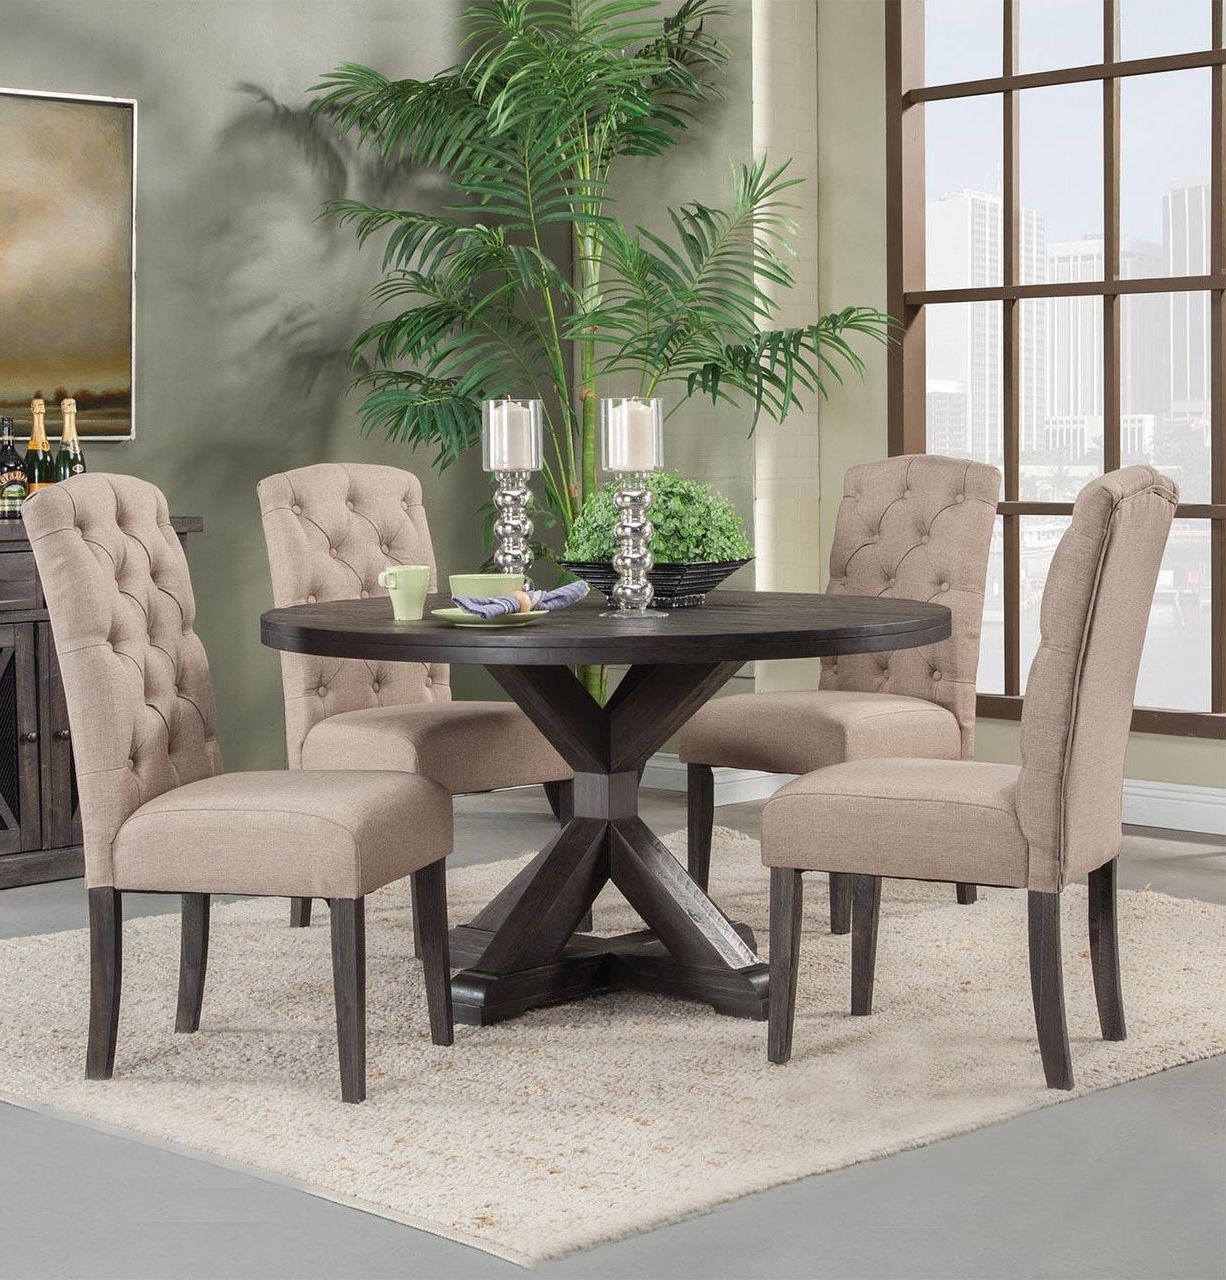 Most Recent Round Dining Tables With Regard To Set Tables Dining Room For Circle Extending Appealing Large Oak (View 25 of 25)